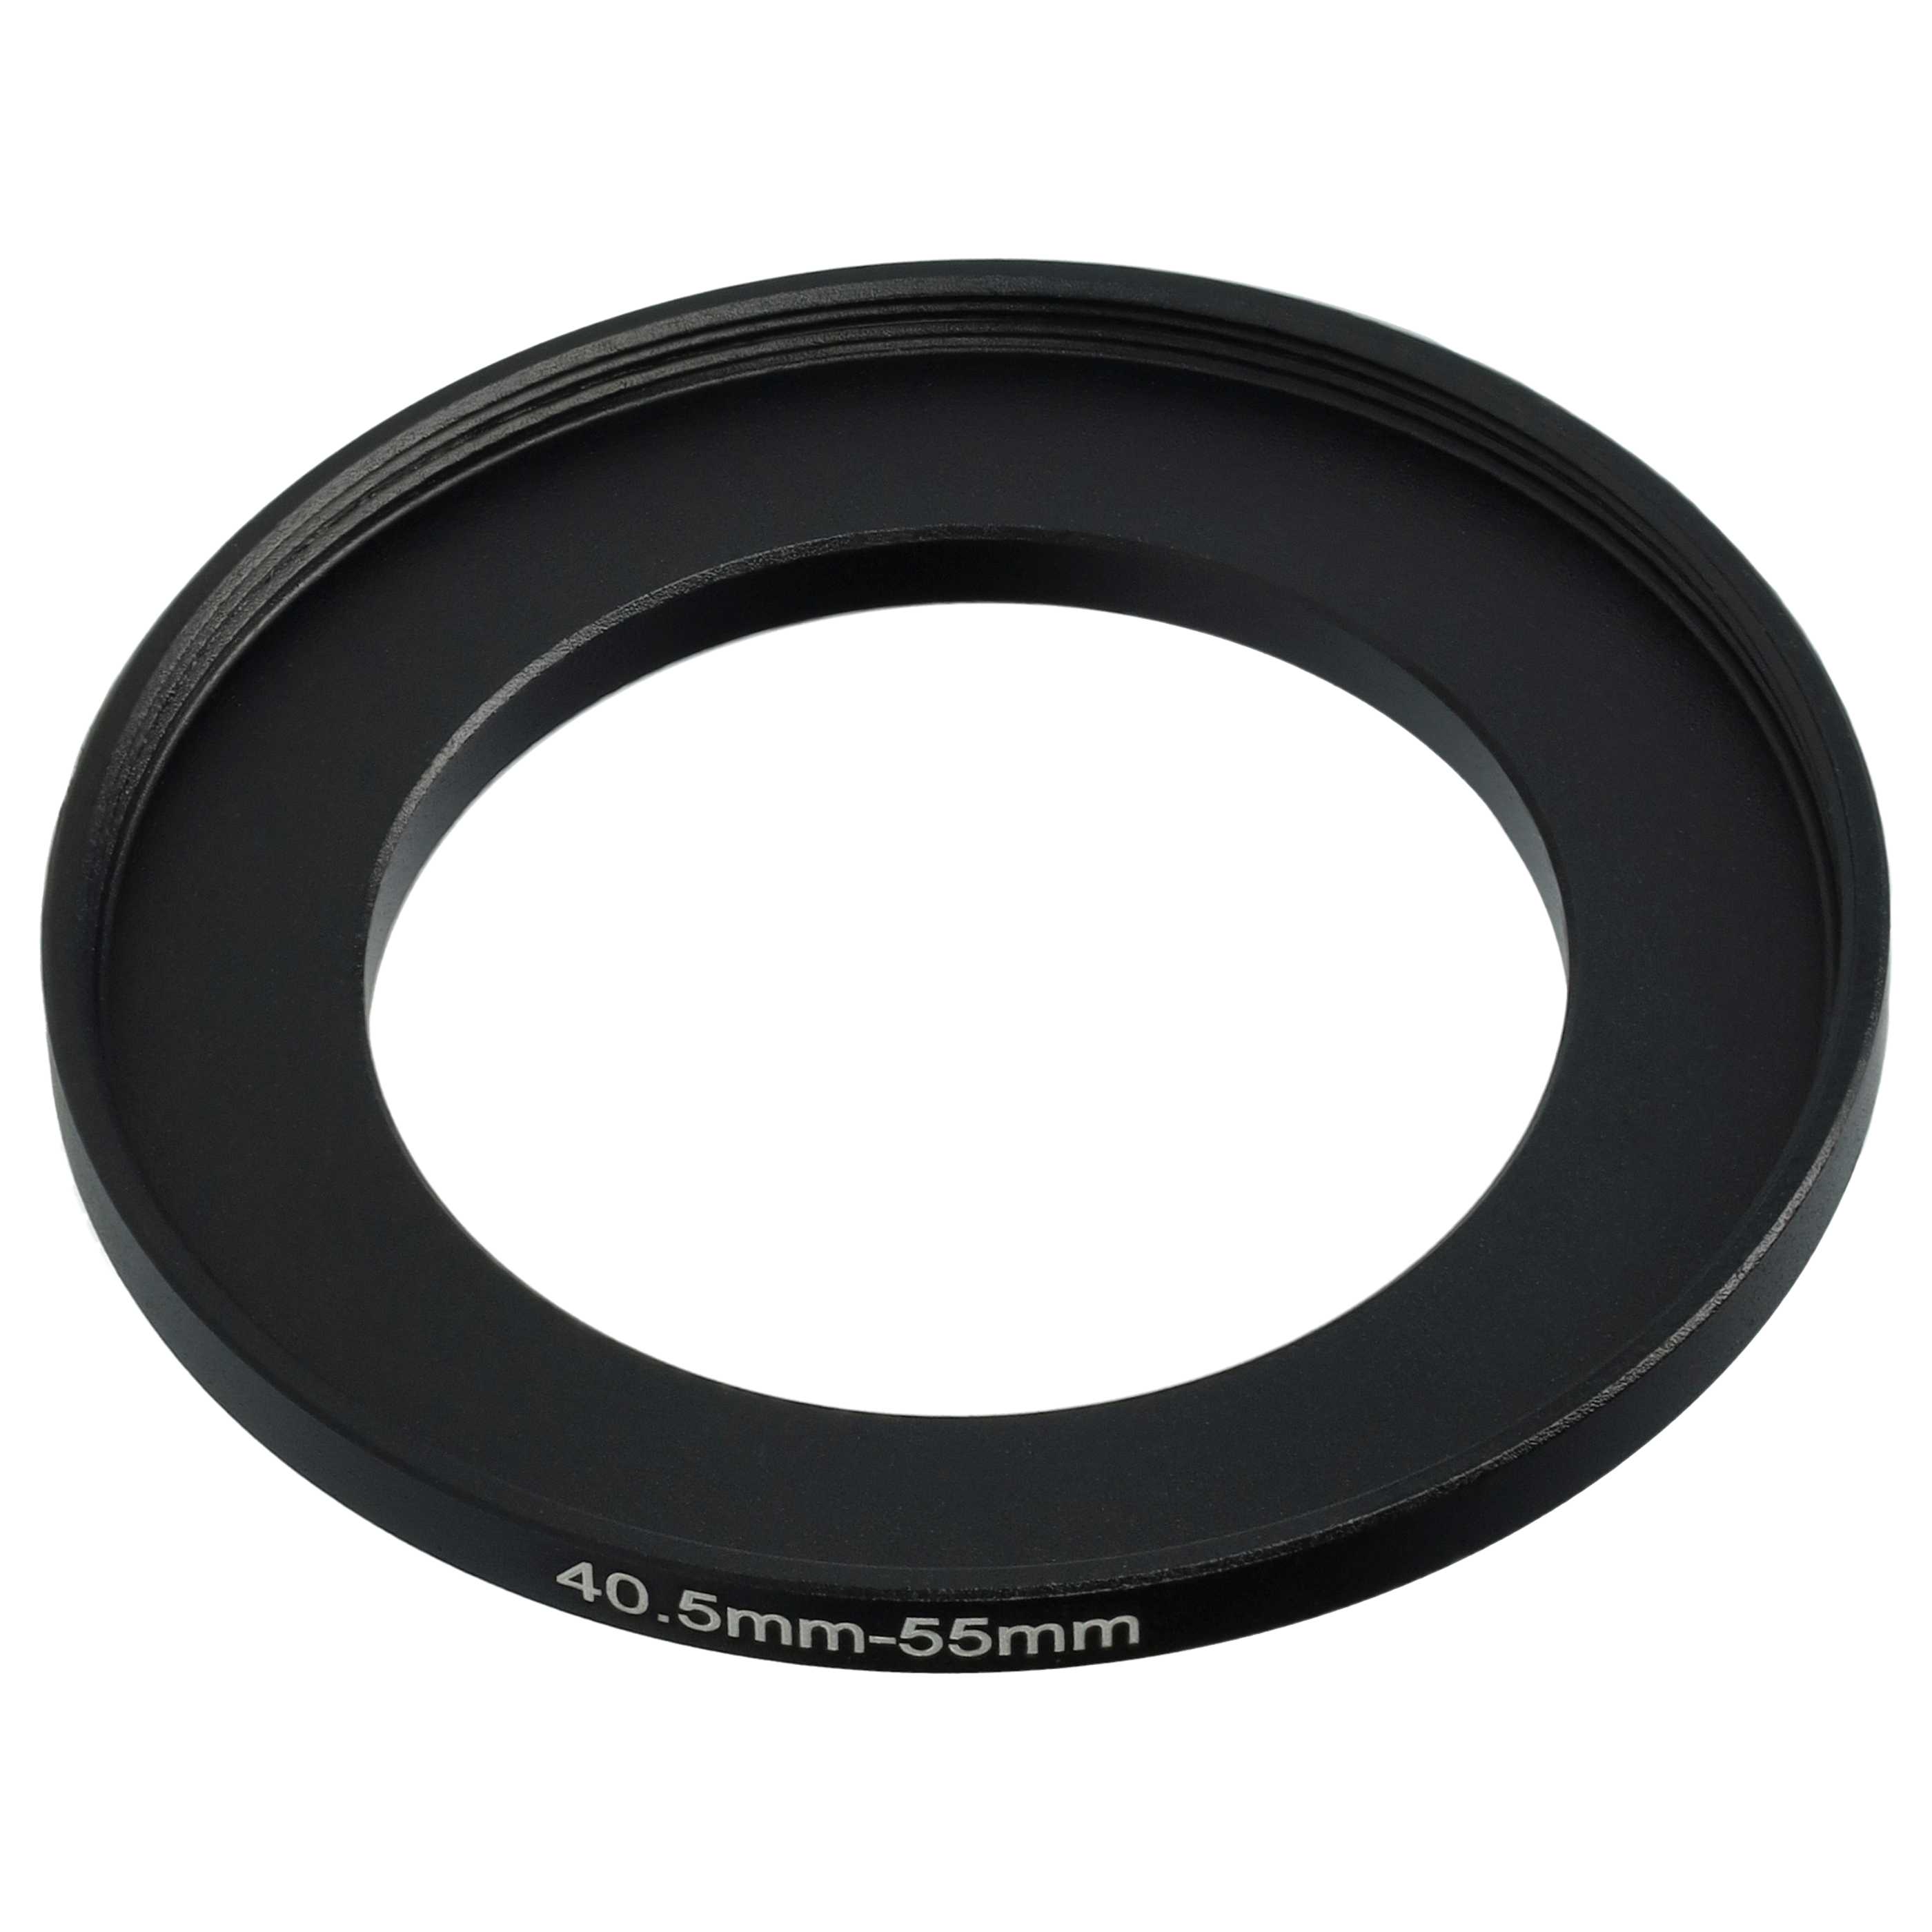 Step-Up Ring Adapter of 40.5 mm to 55 mmfor various Camera Lens - Filter Adapter